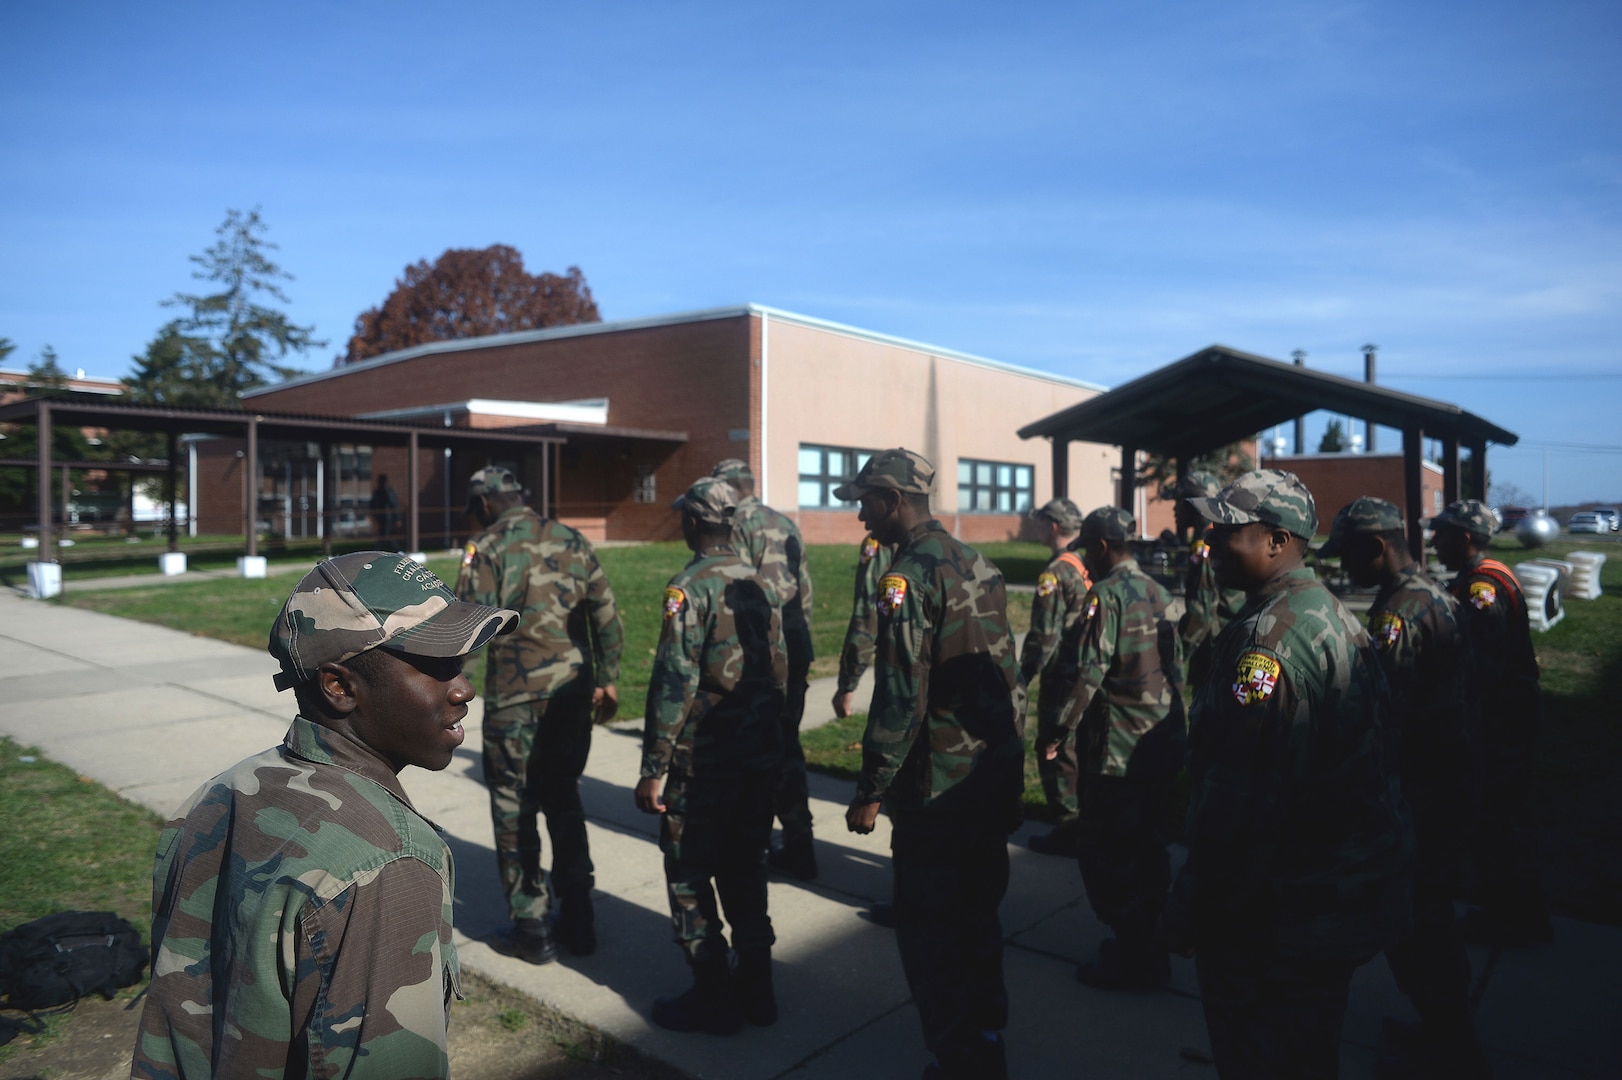 The rhythm of boots marching in unison echoes off the surrounding buildings as a cadet with the Maryland National Guard’s Freestate ChalleNGe Academy marches his platoon to the academy’s mess hall, Nov. 17, 2015. For cadets at the academy—part of the National Guard’s Youth ChalleNGe Program, which provides a path for "at-risk" youth to  receive a GED or high school diploma—marching is an everyday part of life at the academy where a military-style boot camp environment is used to create structure and build discipline among cadets.